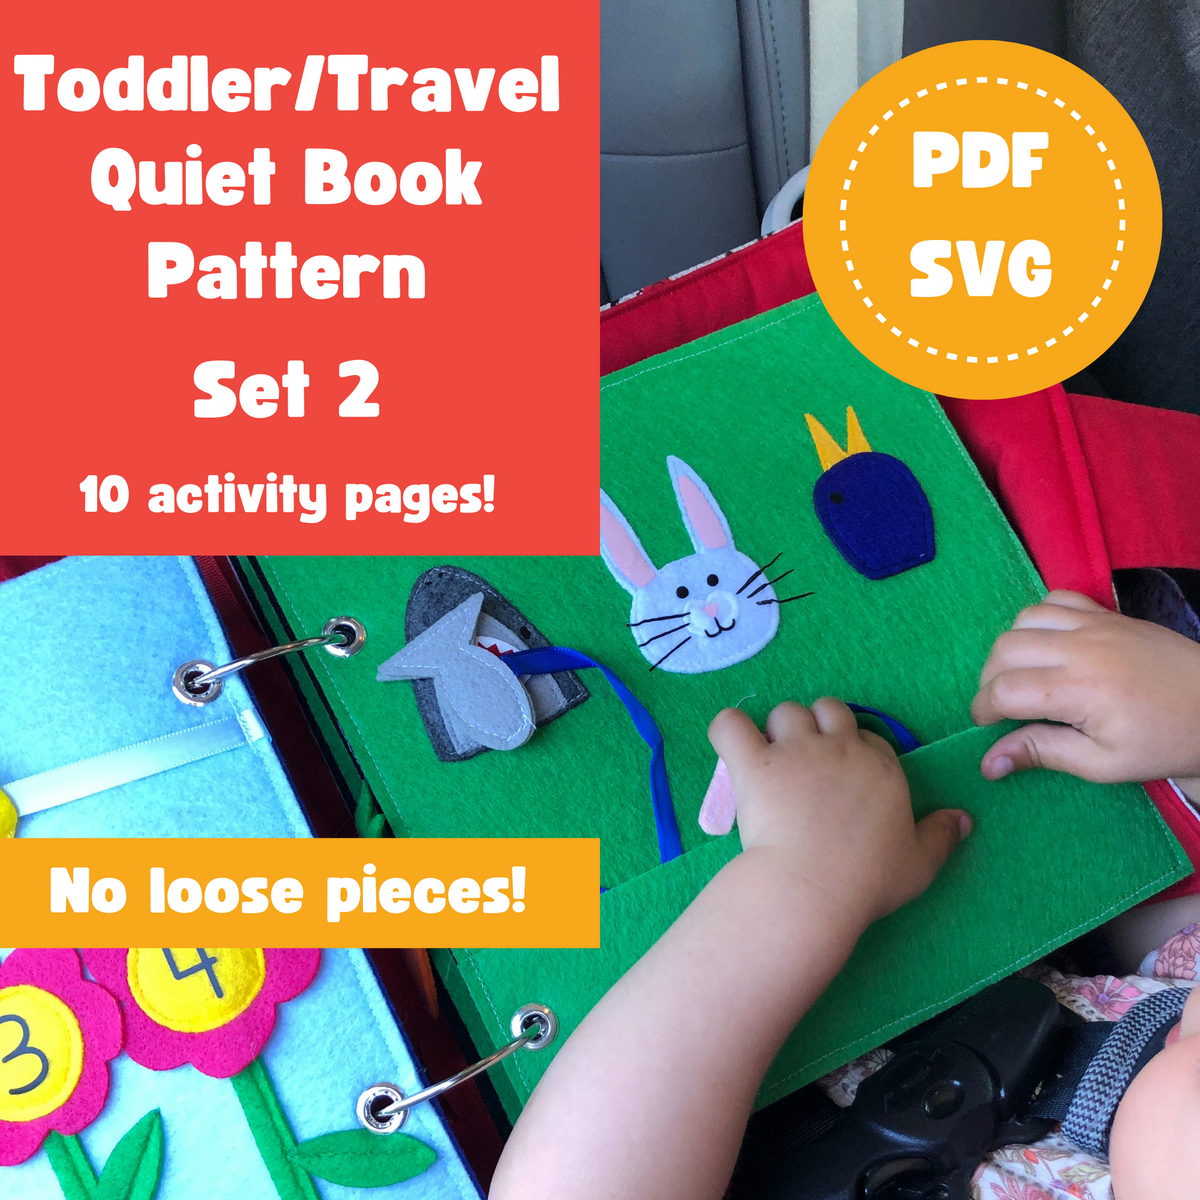 Travel/Toddler Quiet Book Set 2 Template and Instructions Bundle